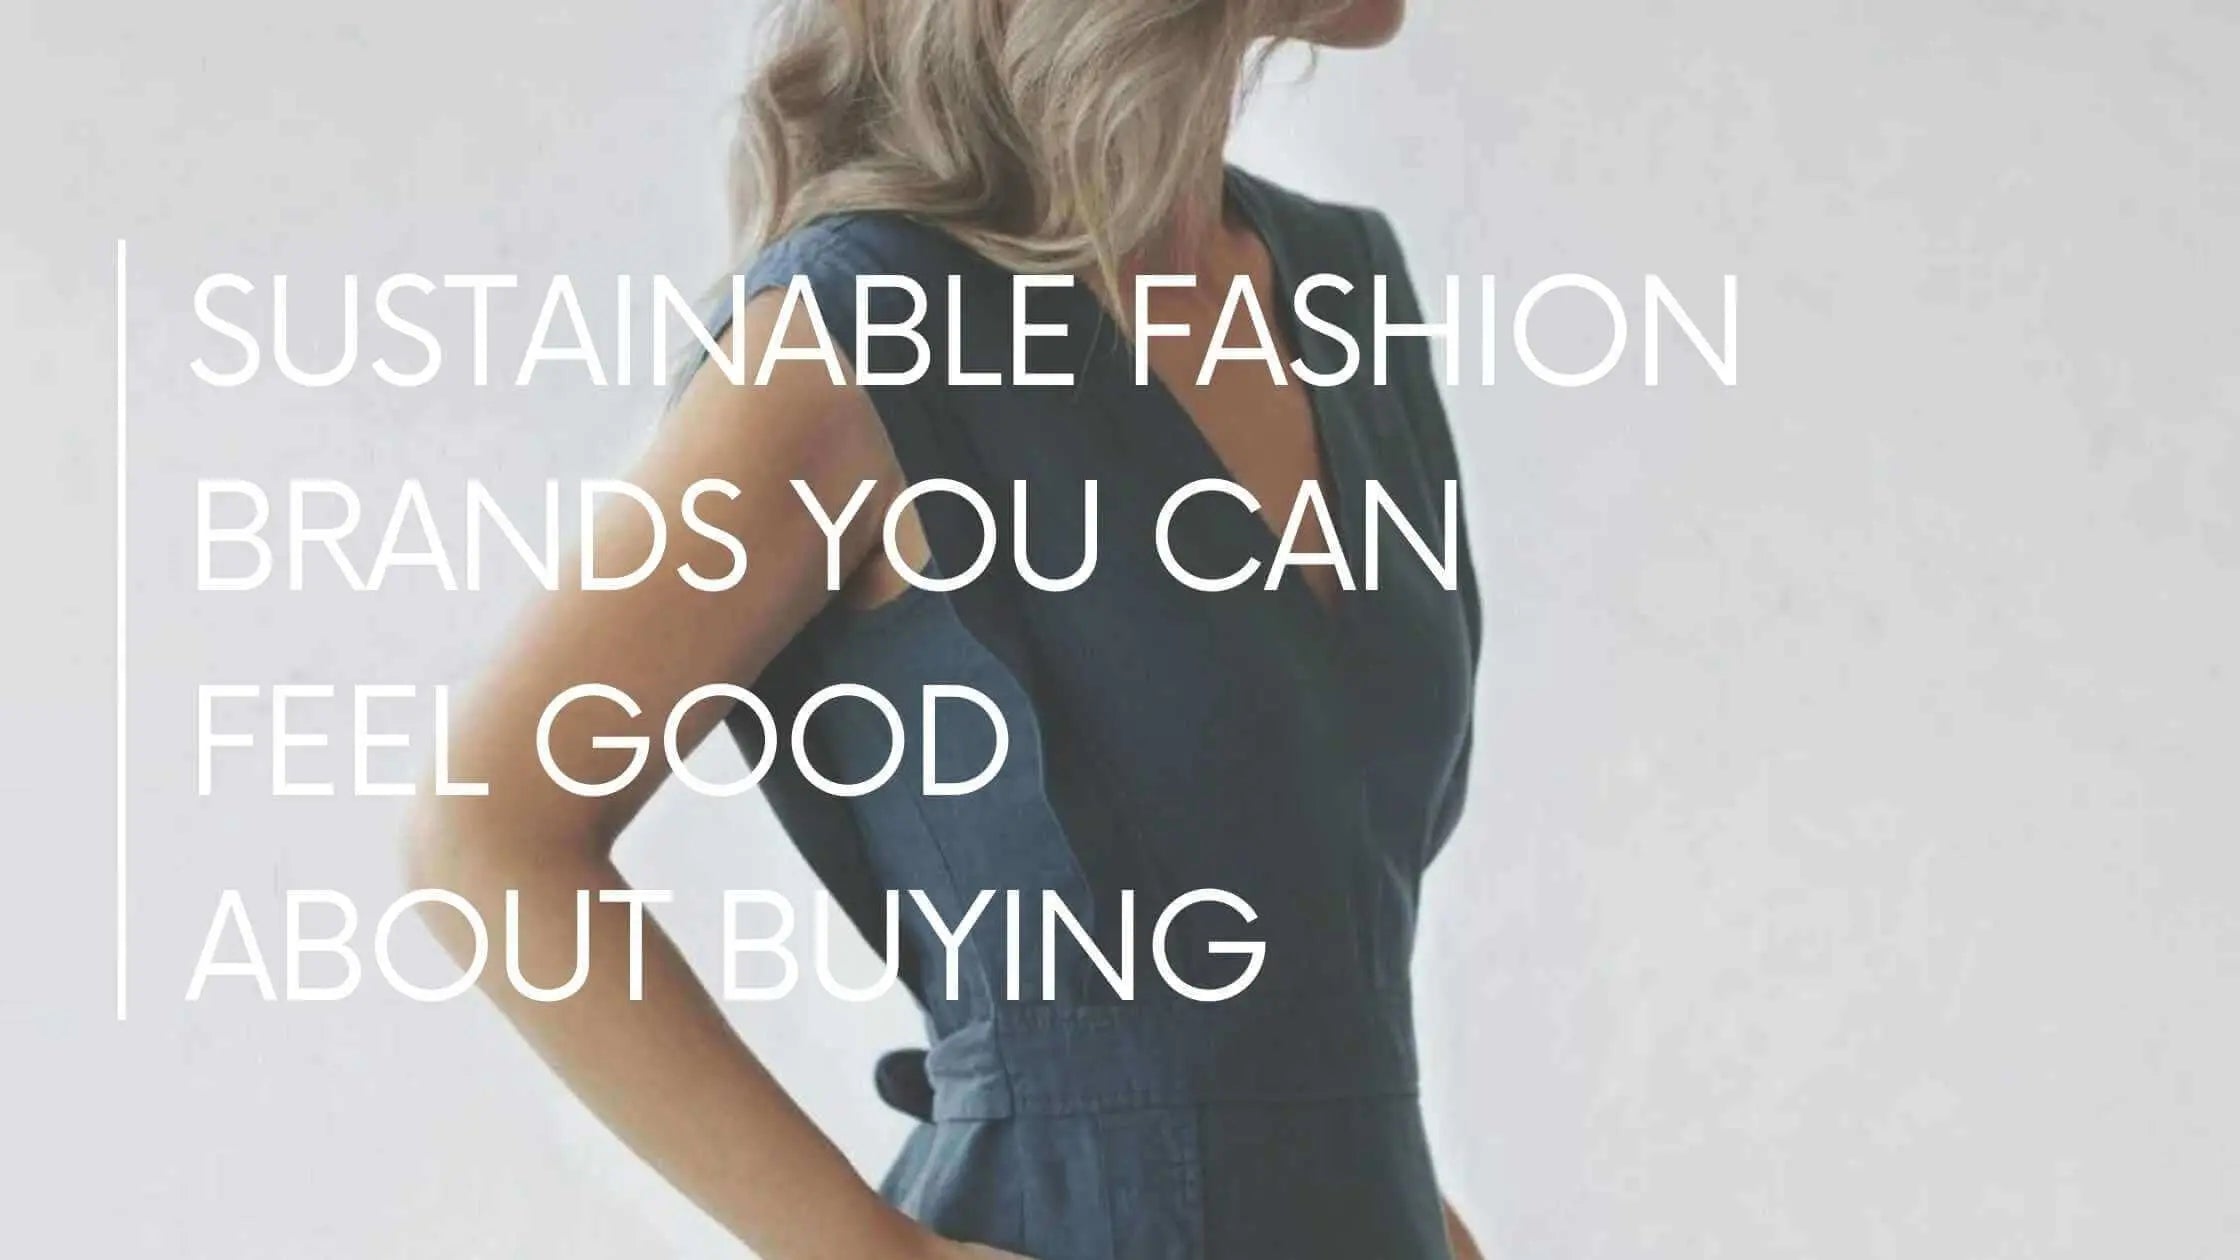 Sustainable Fashion Brands You Can Feel Good About Buying